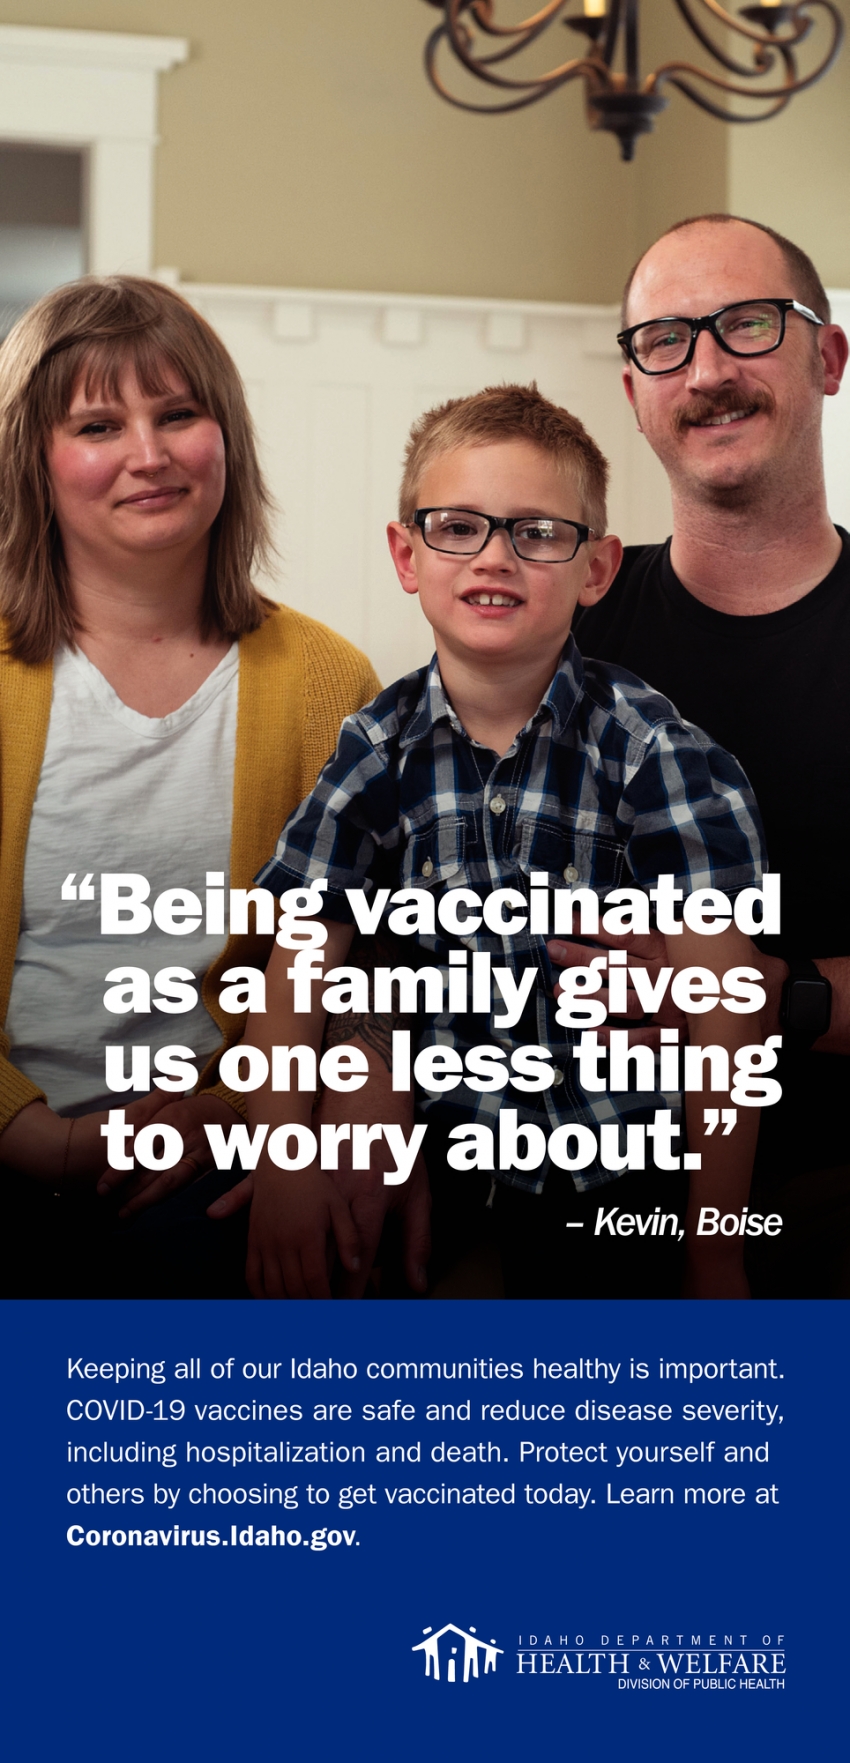 Project Being Vaccinated As A Family Gives Us One Less Thing To Worry About